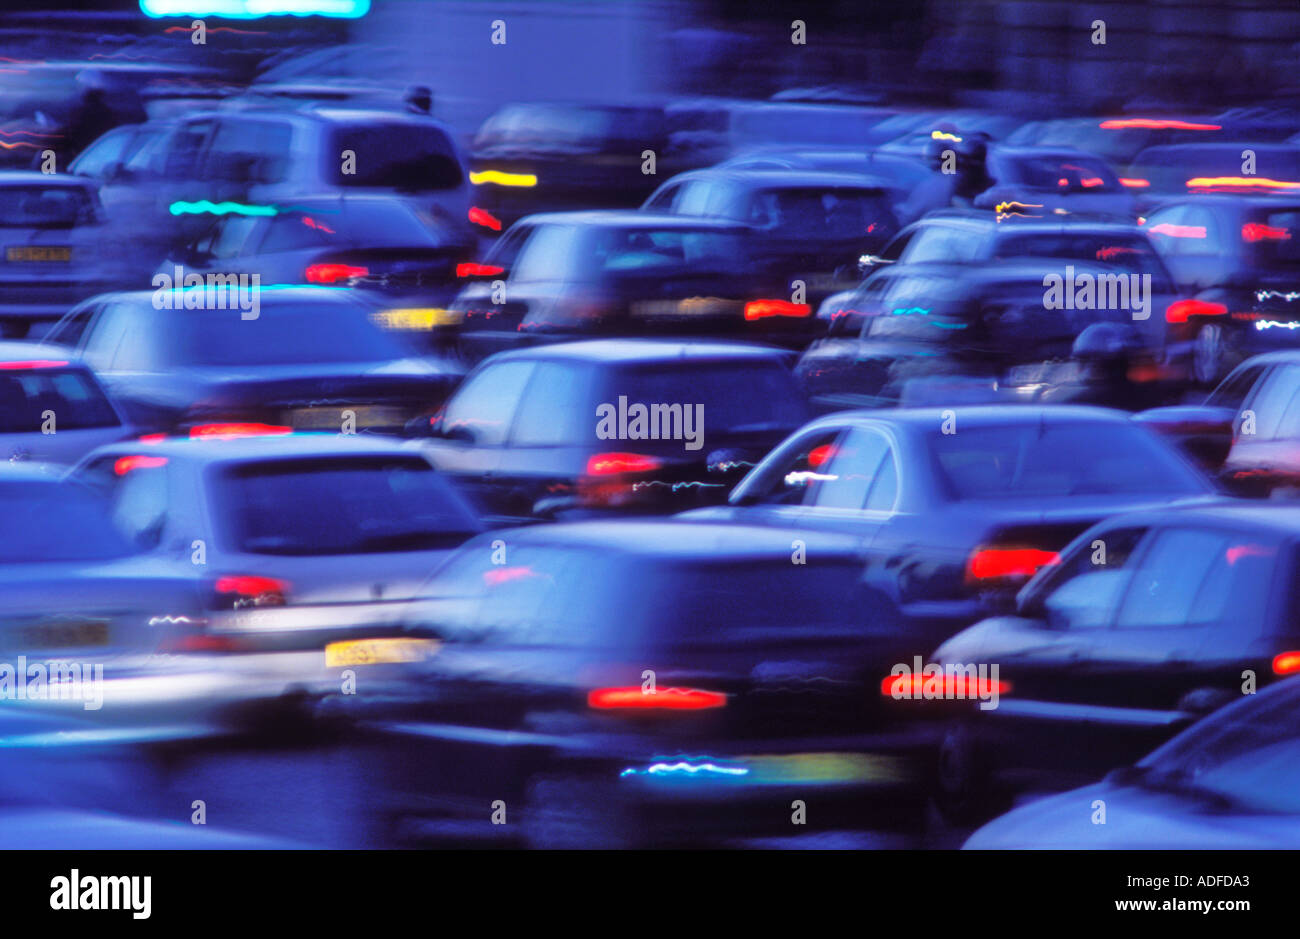 France Paris automobile traffic at night blurred Stock Photo